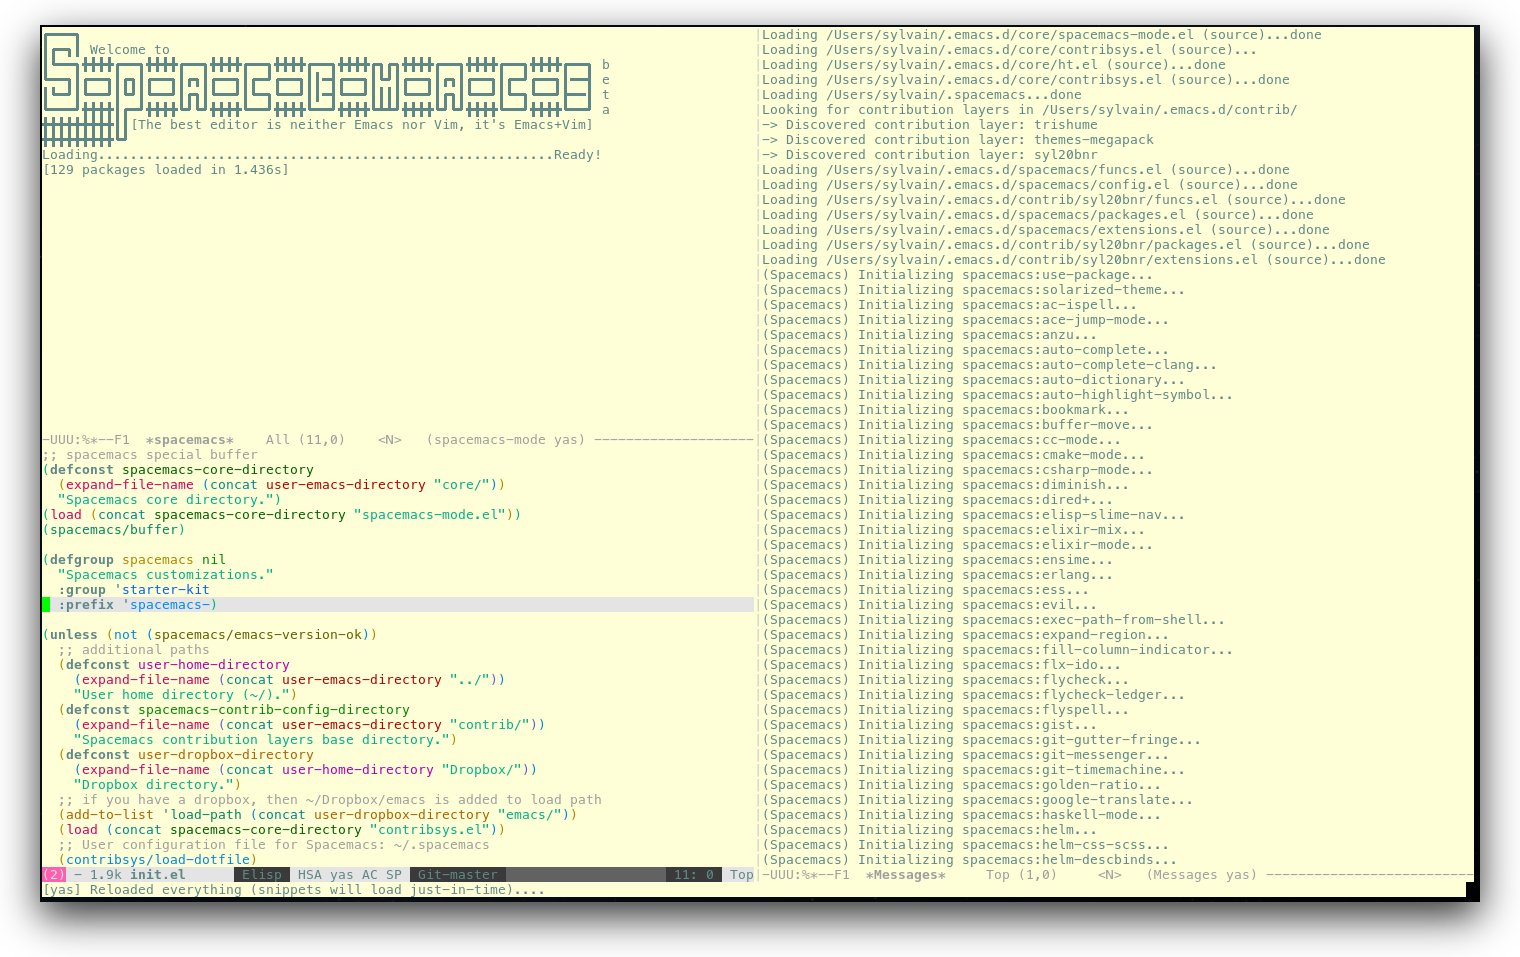 /TakeV/spacemacs/media/commit/a788e1a88e34808be83e770a8157d7131c7af0b1/doc/img/spacemacs-urxvt.png